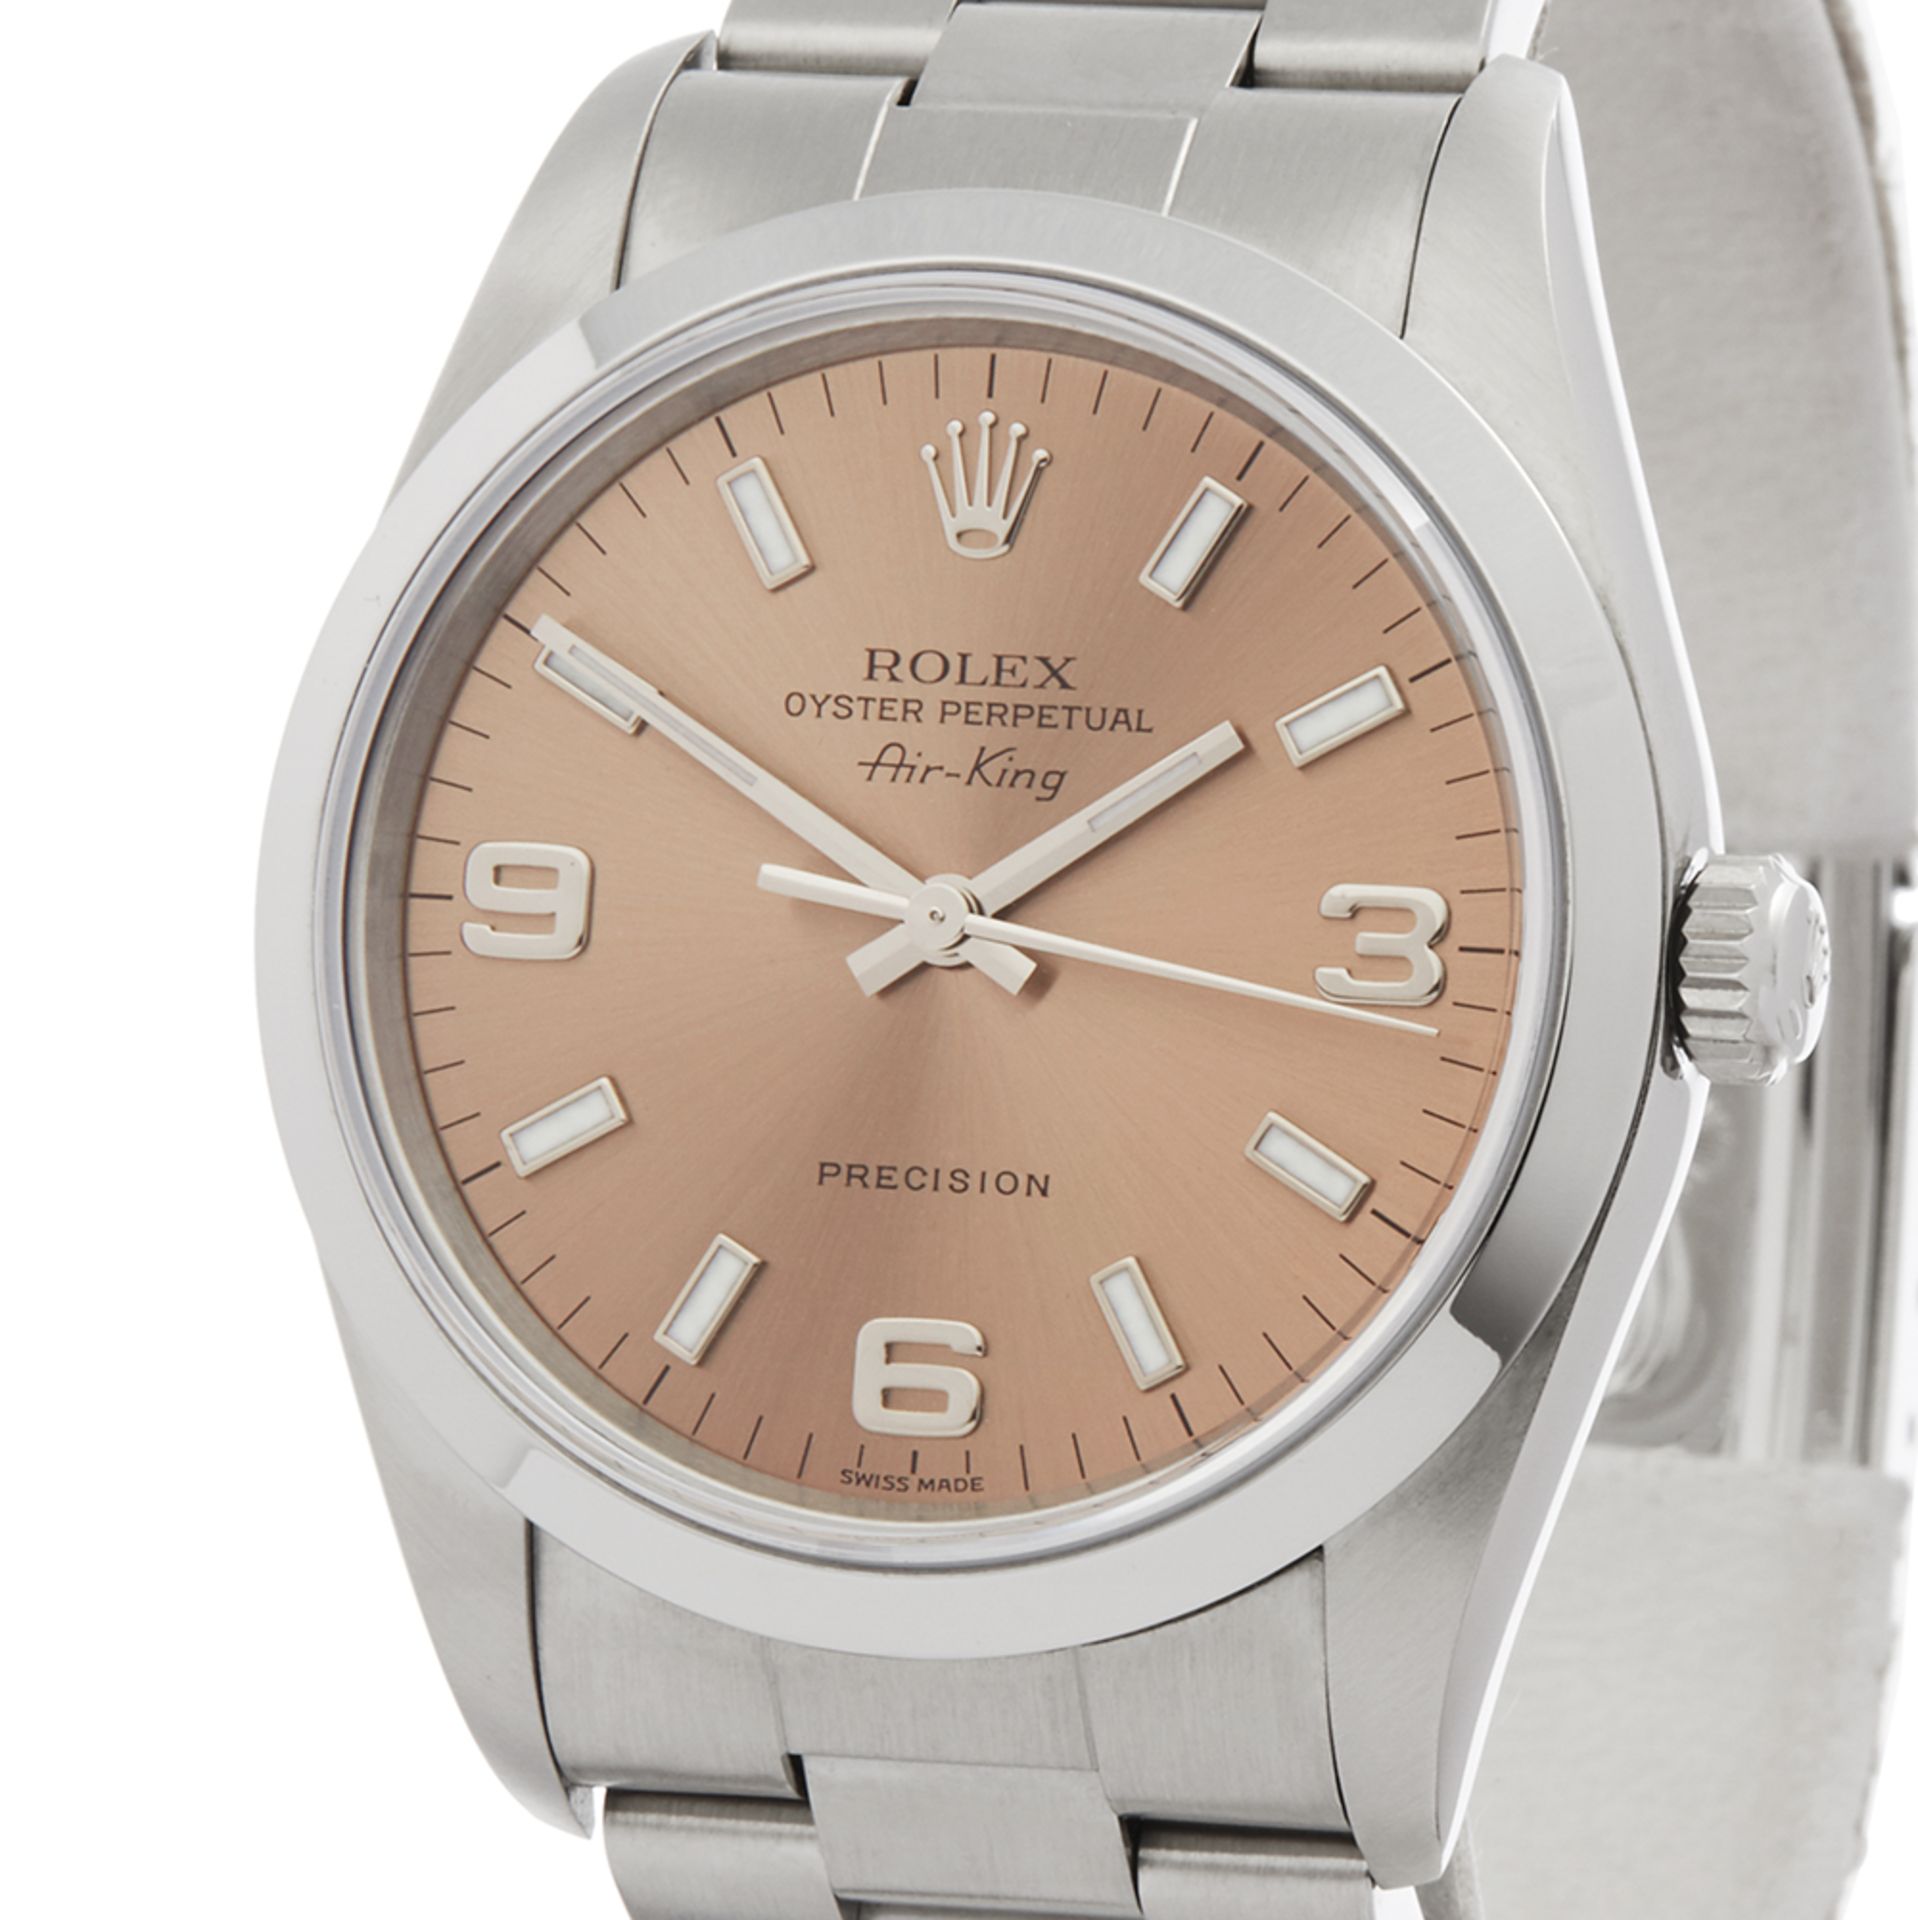 2000 Rolex Air-King 34 Precision Stainless Steel - 14000 - Image 7 of 8